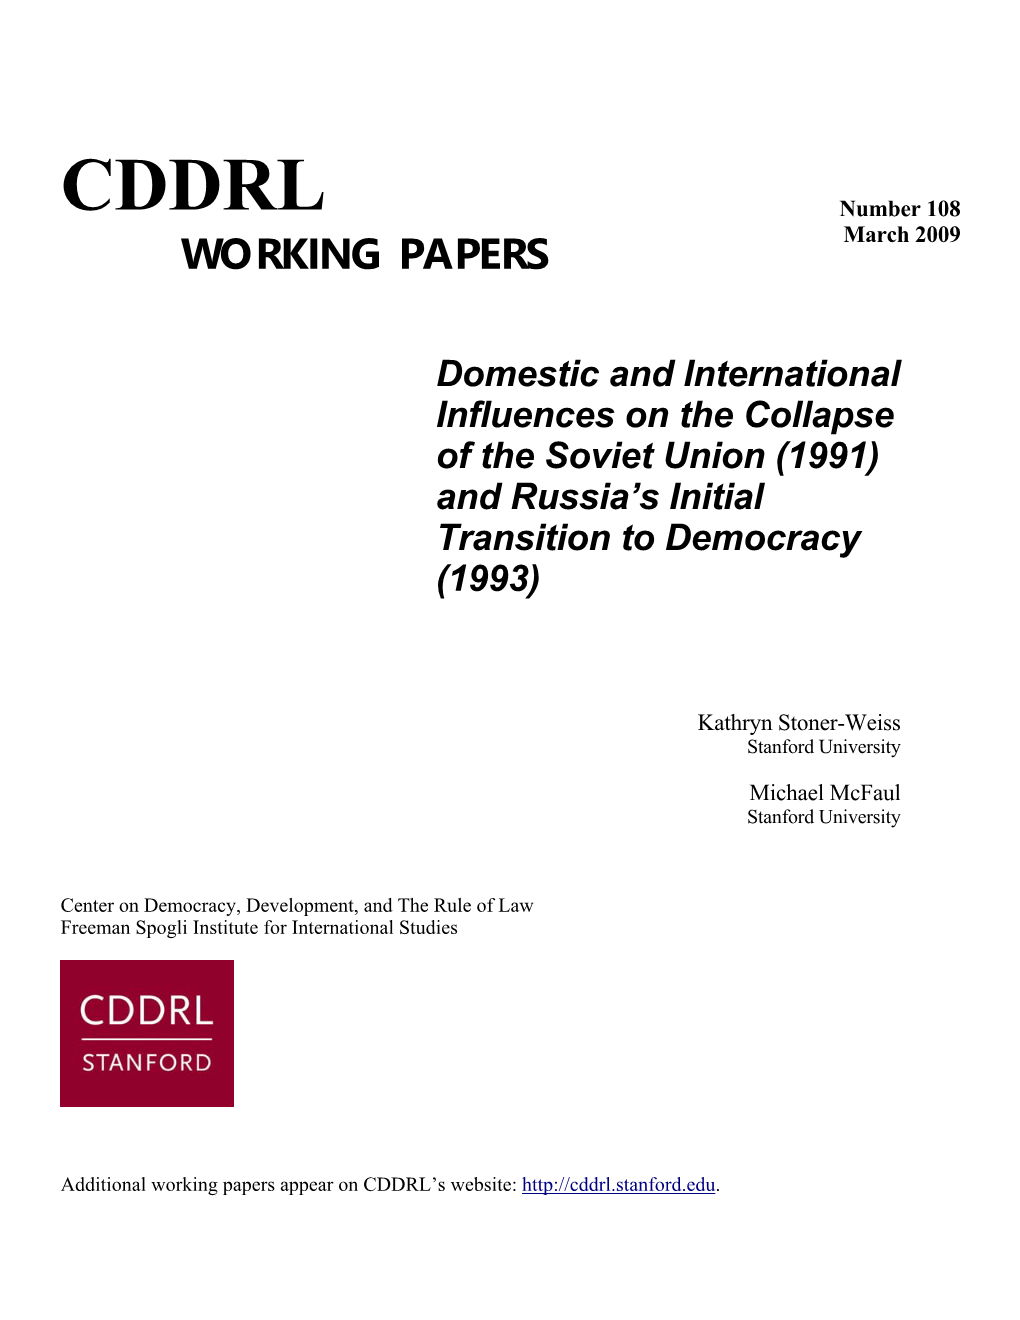 Causes of the Collapse of the Soviet Union and Russia's Initial Transition